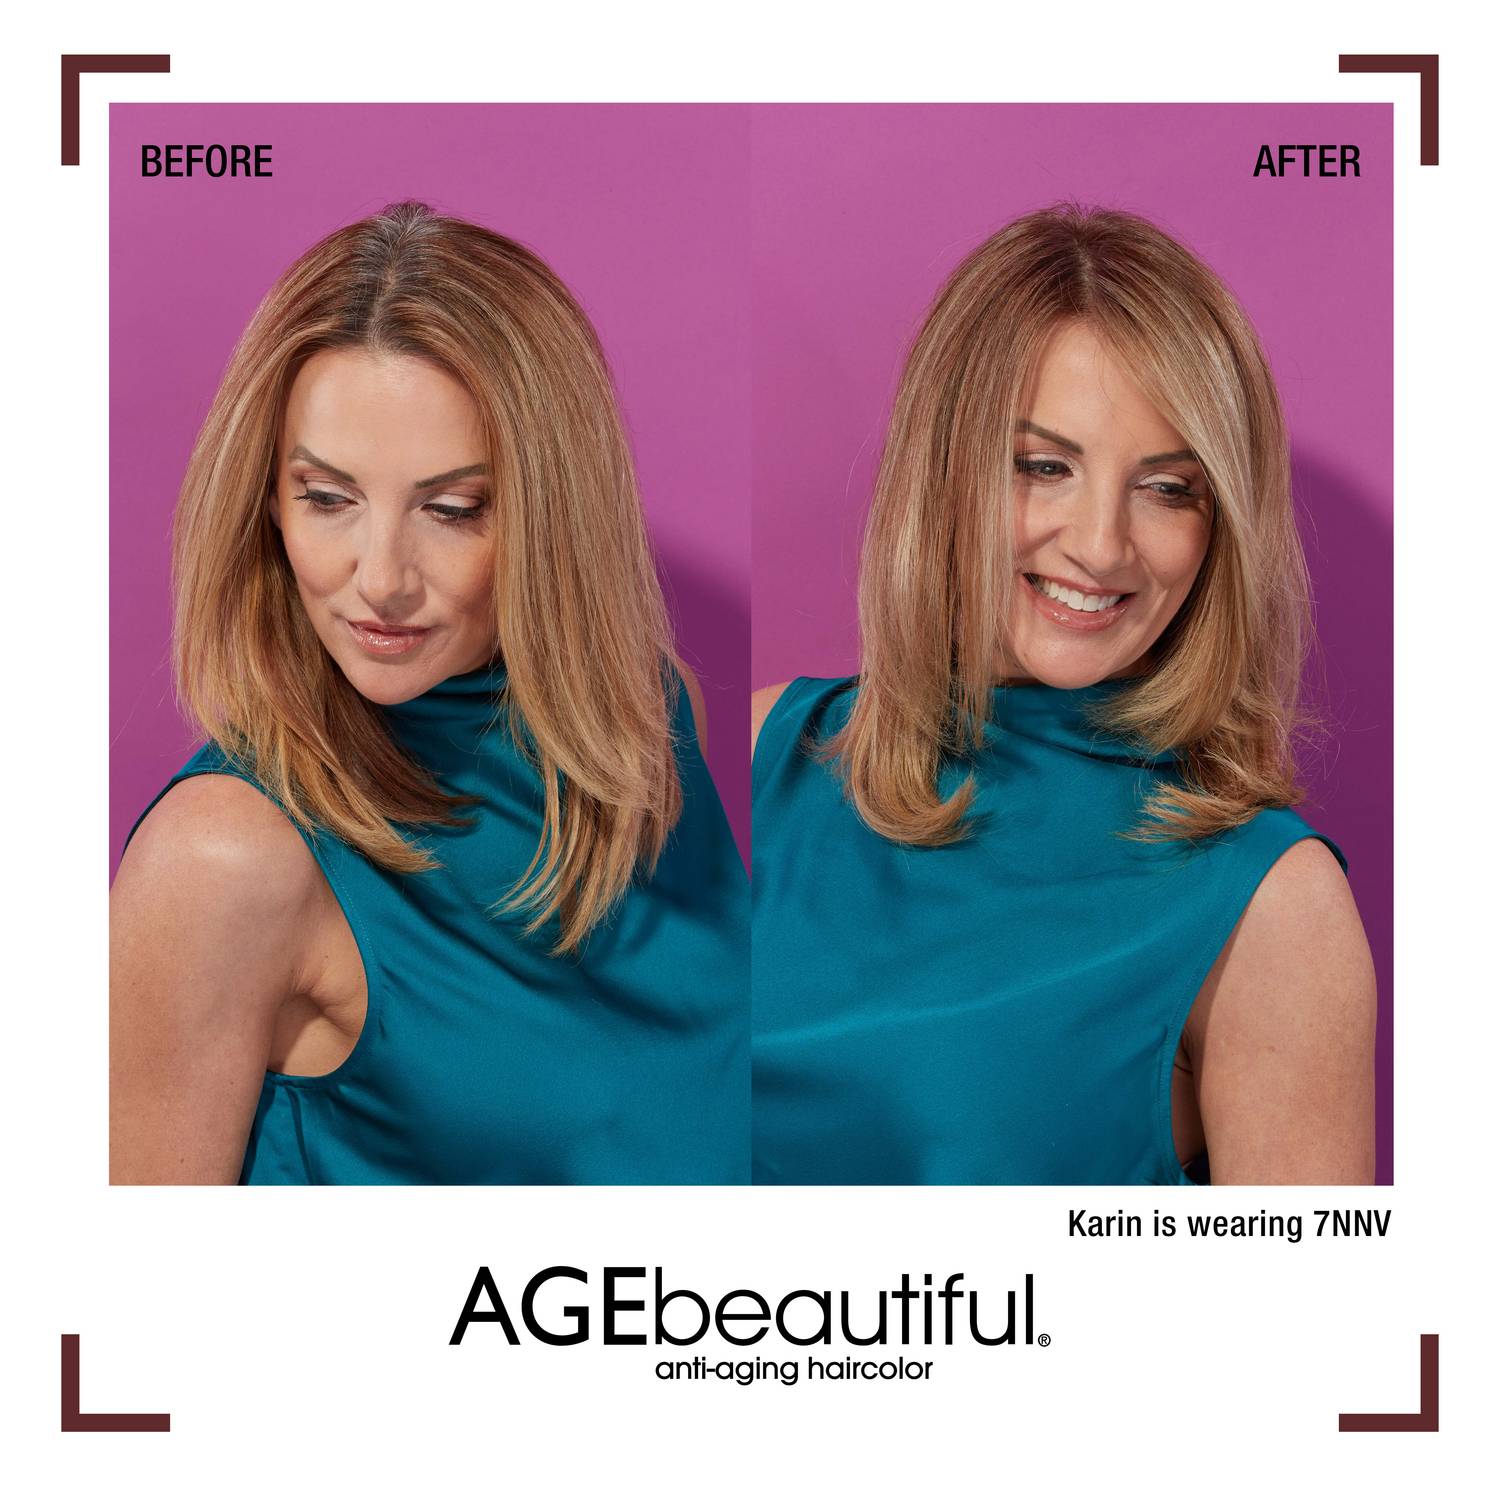 7NNV Before & After AGEbeautiful Hair Color